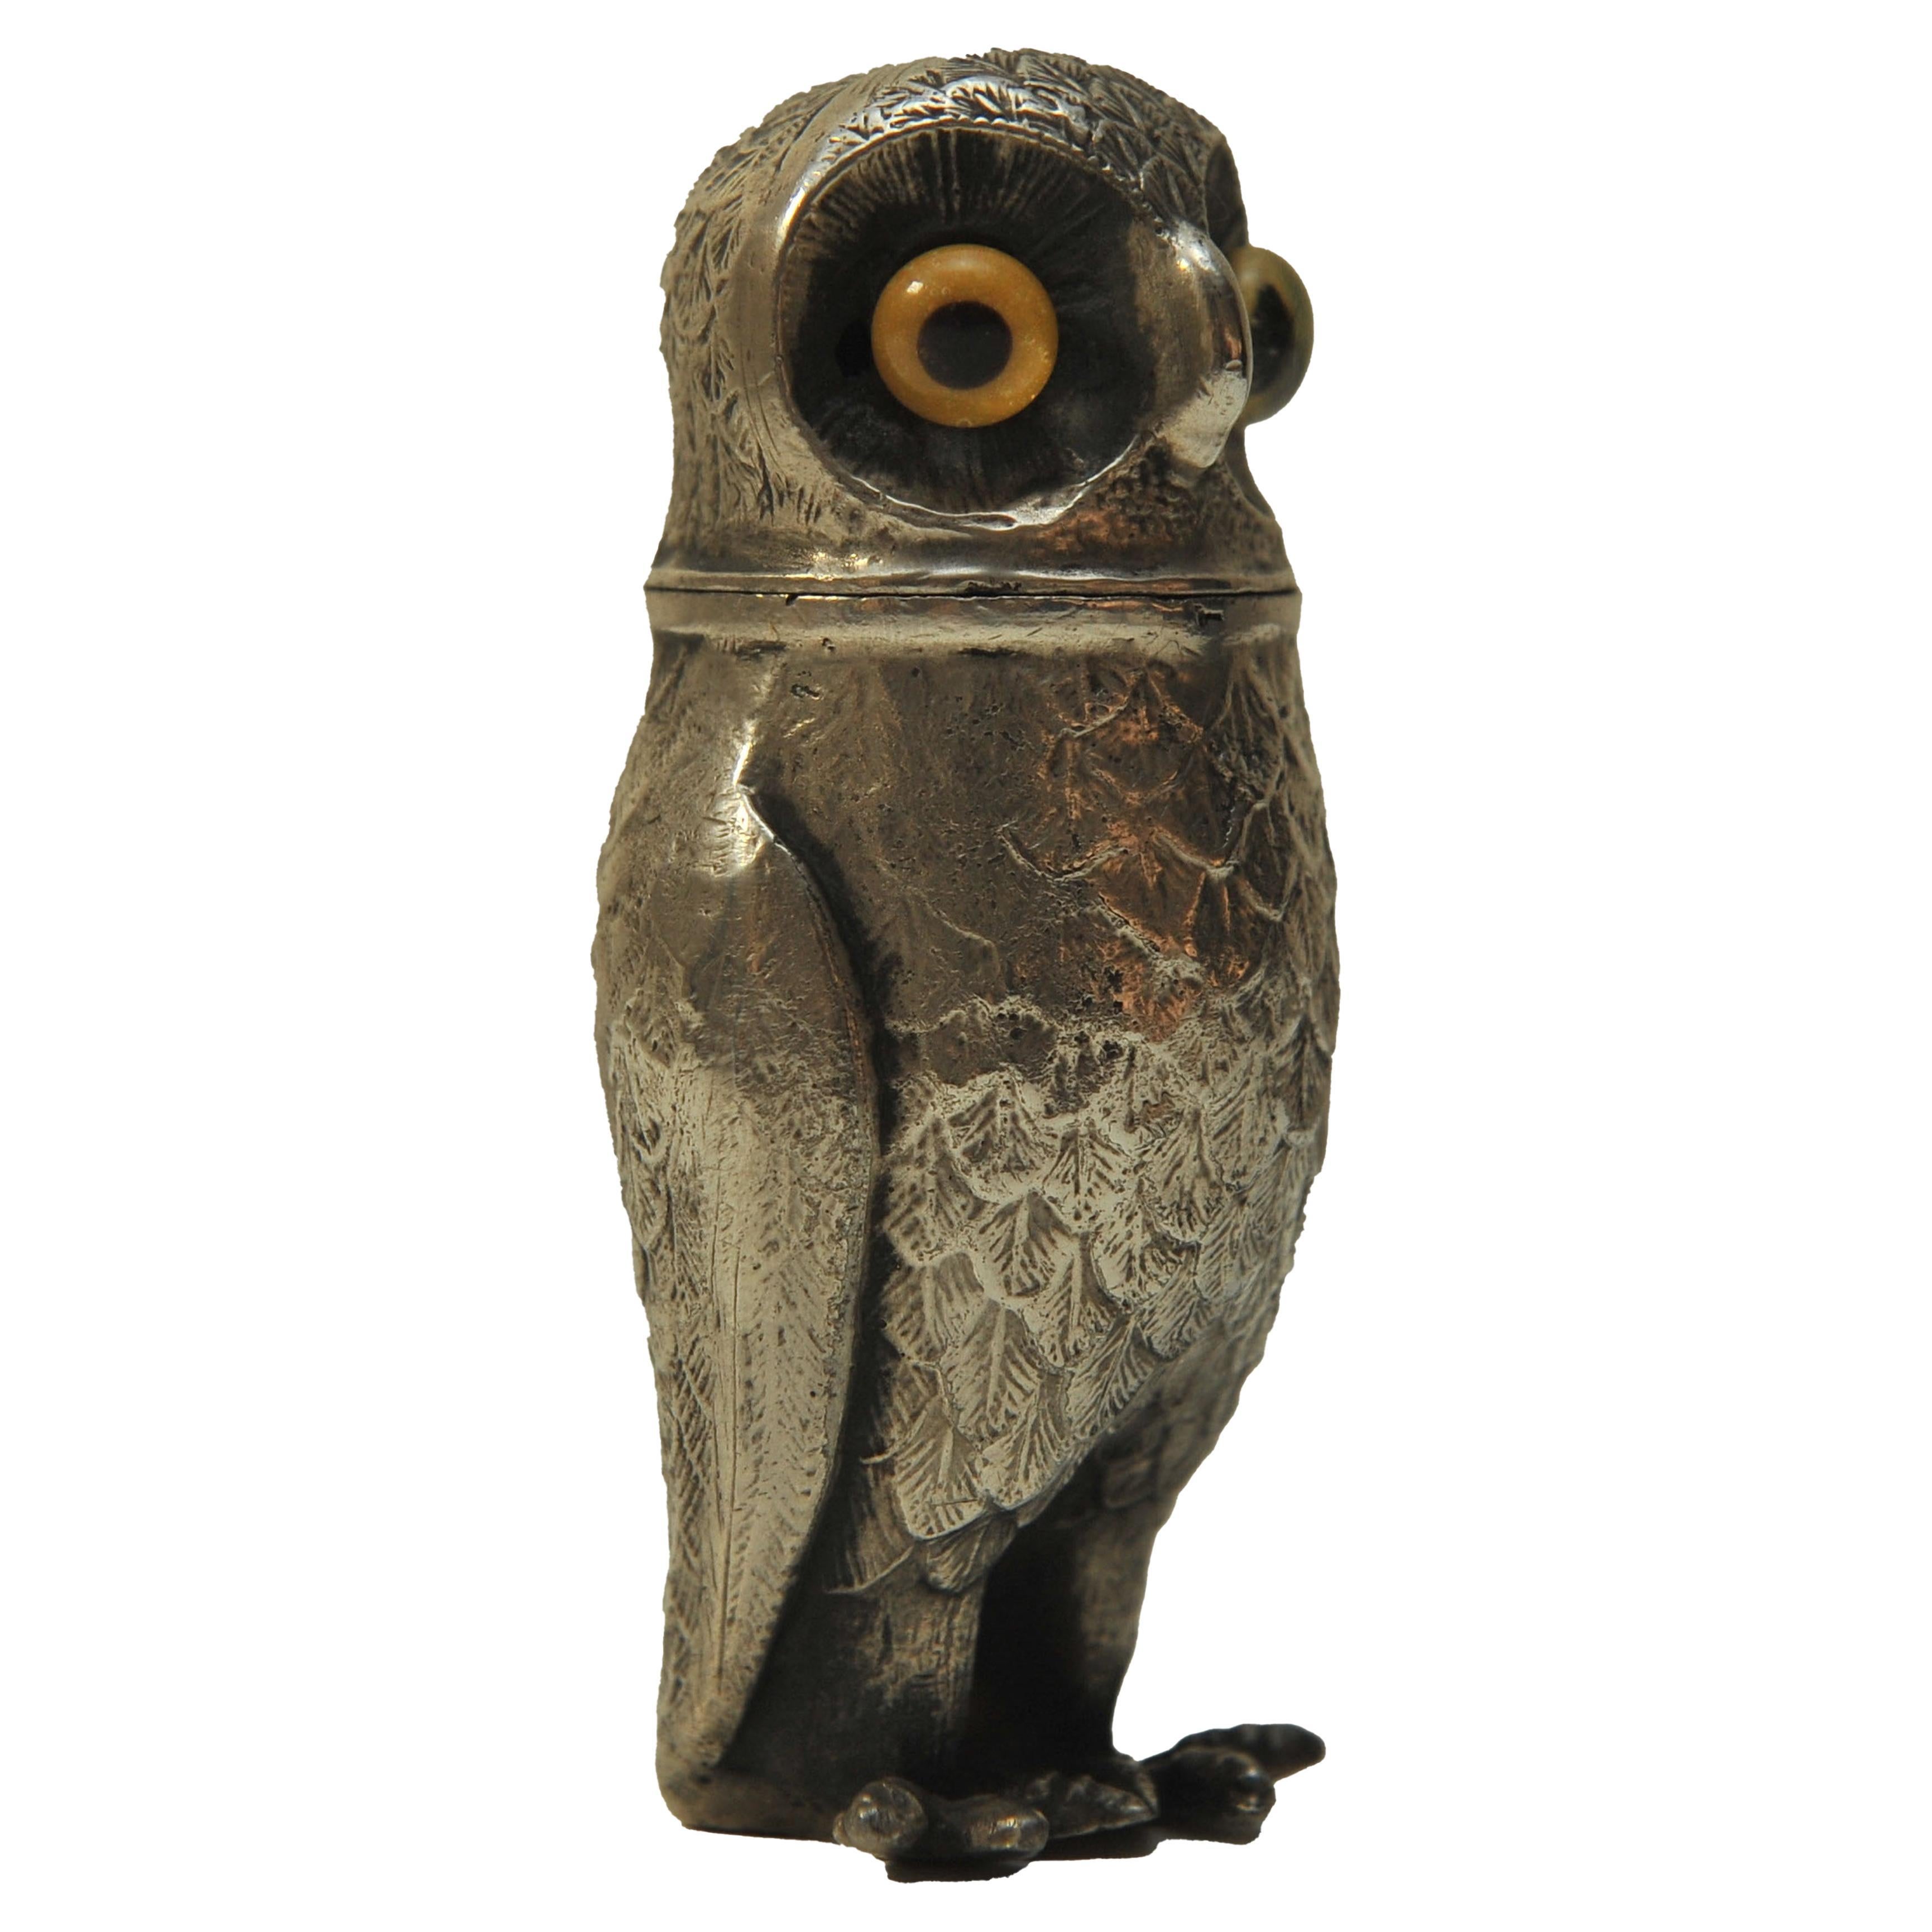 A Continental Silver Pepper Peperette In The Form of An Owl With Glass Eyes.

A lovely 19th century (Victorian era) German silver pepperette or pounce pot (used to contain fine sand to shake on to handwritten ink documents to dry them) in the form